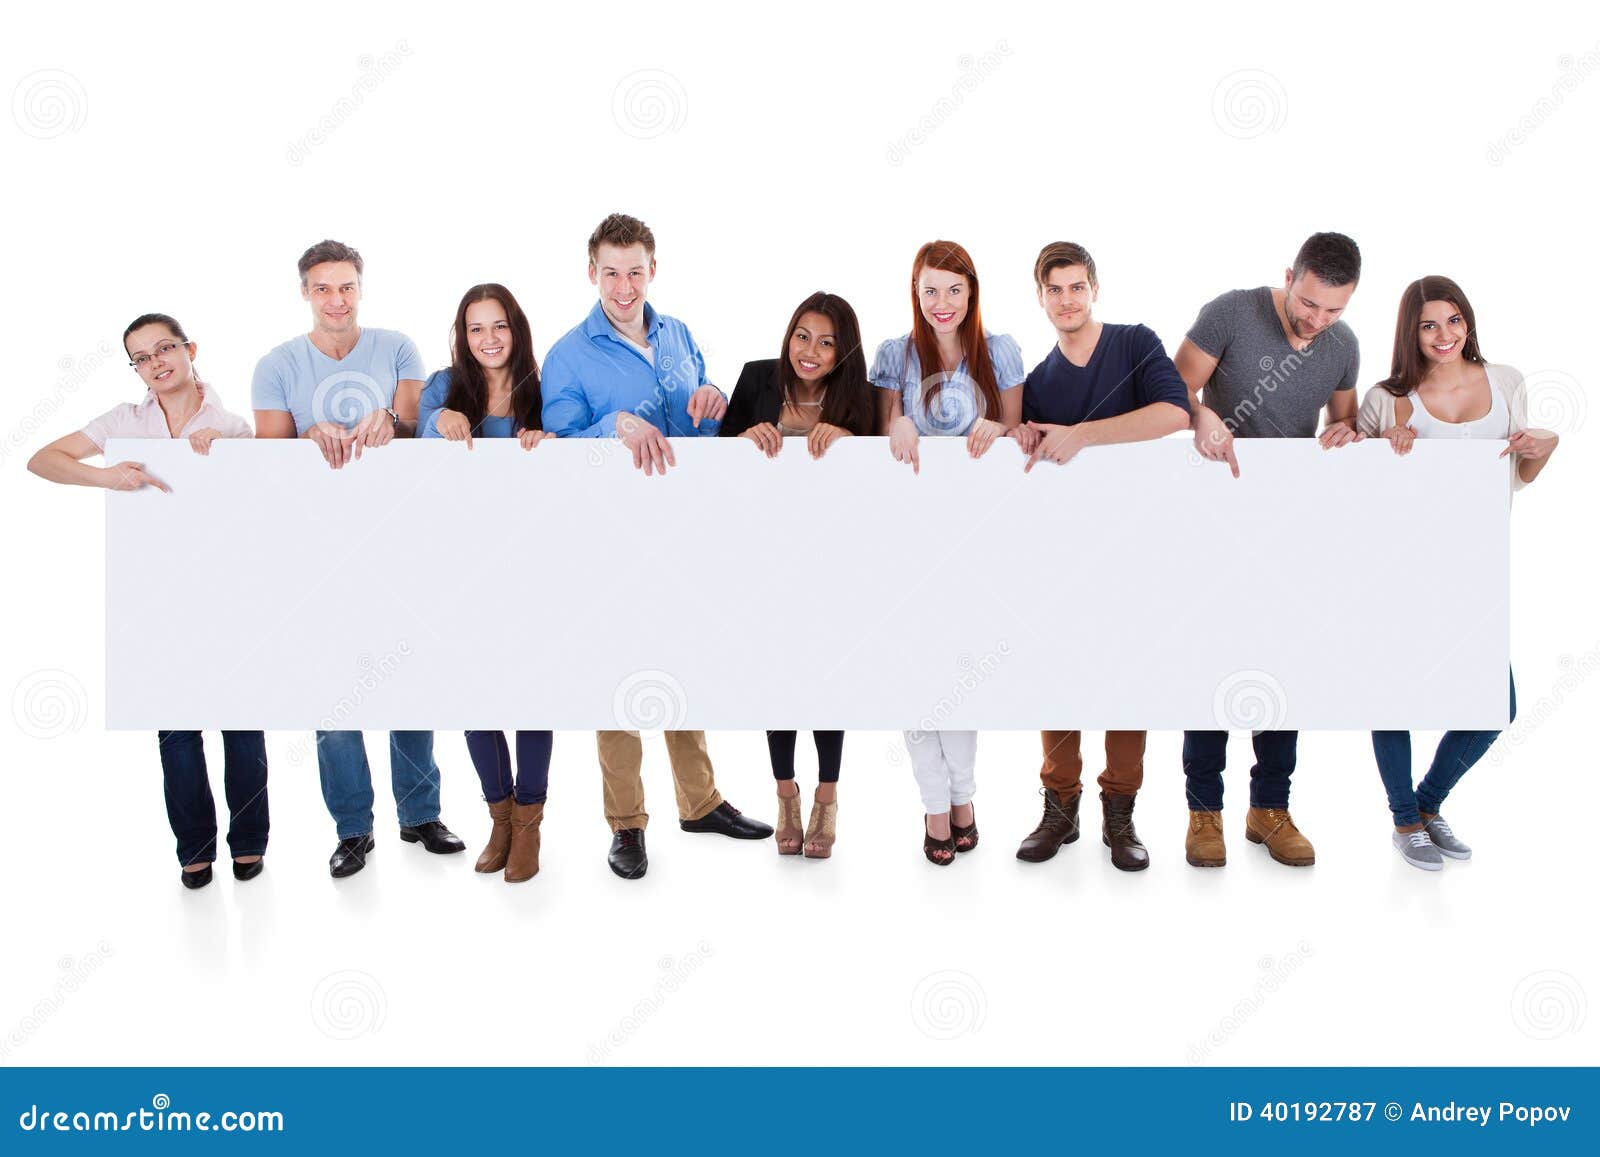 Diverse Group Of People Presenting Banner Stock Image - Image of group ... Office Team Celebration